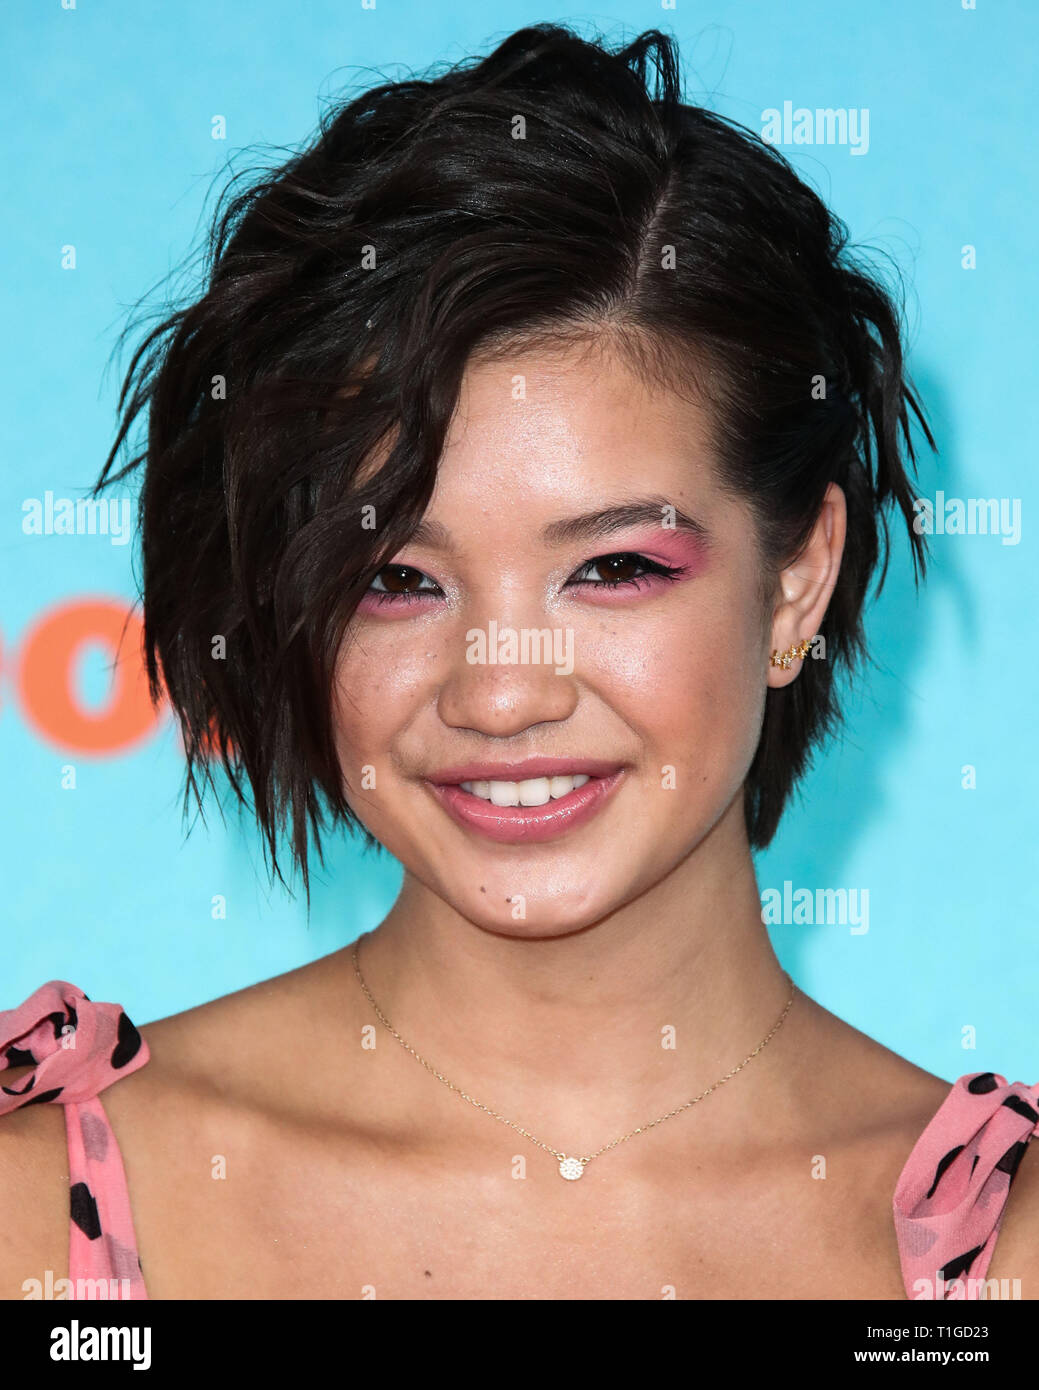 LOS ANGELES, CA, USA - MARCH 23: Peyton Elizabeth Lee arrives at Nickelodeon's 2019 Kids' Choice Awards held at the USC Galen Center on March 23, 2019 in Los Angeles, California, United States. (Photo by Xavier Collin/Image Press Agency) Stock Photo